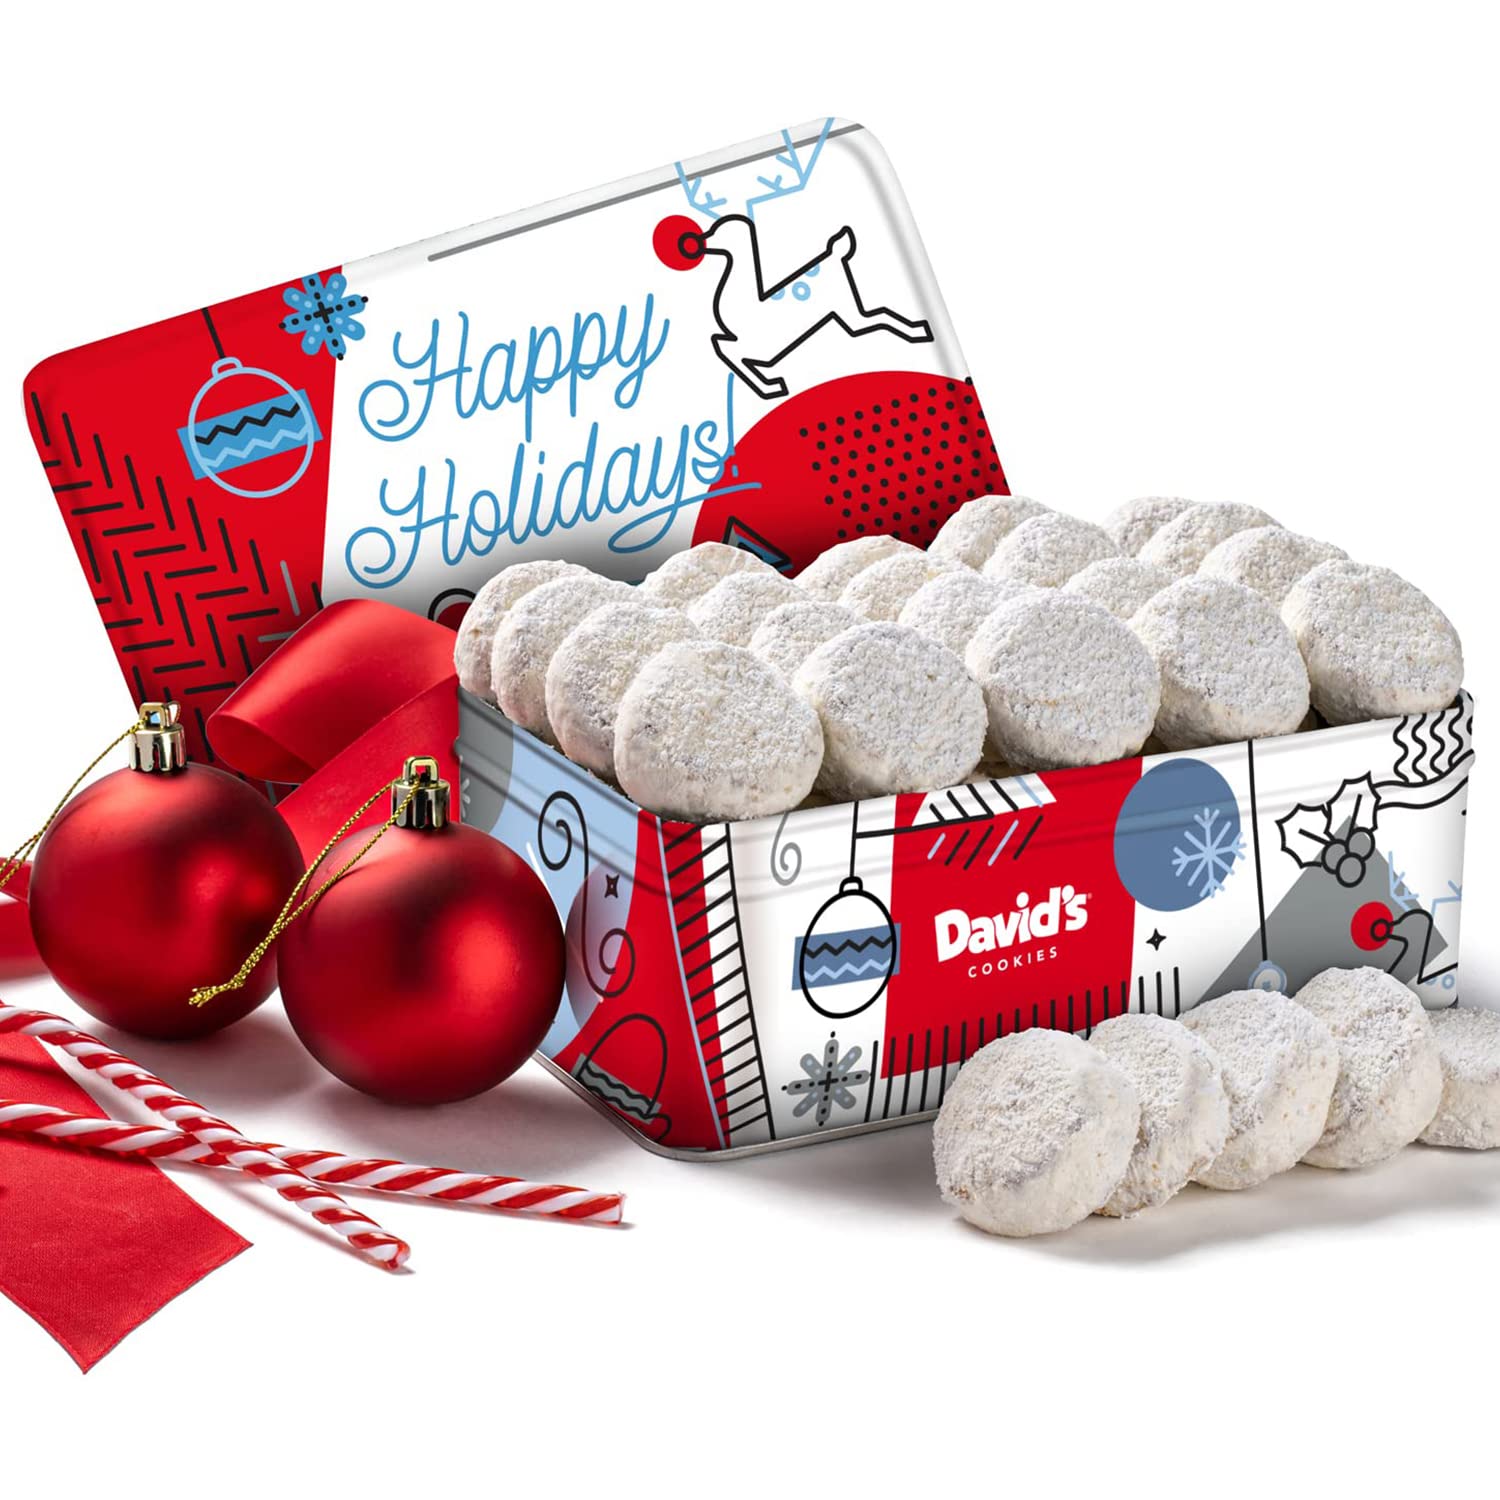 16-Oz David’s Cookies Happy Holiday Butter Pecan Meltaway Cookies Tin $7.32 w/ S&S + Free Shipping w/ Prime or on $35+